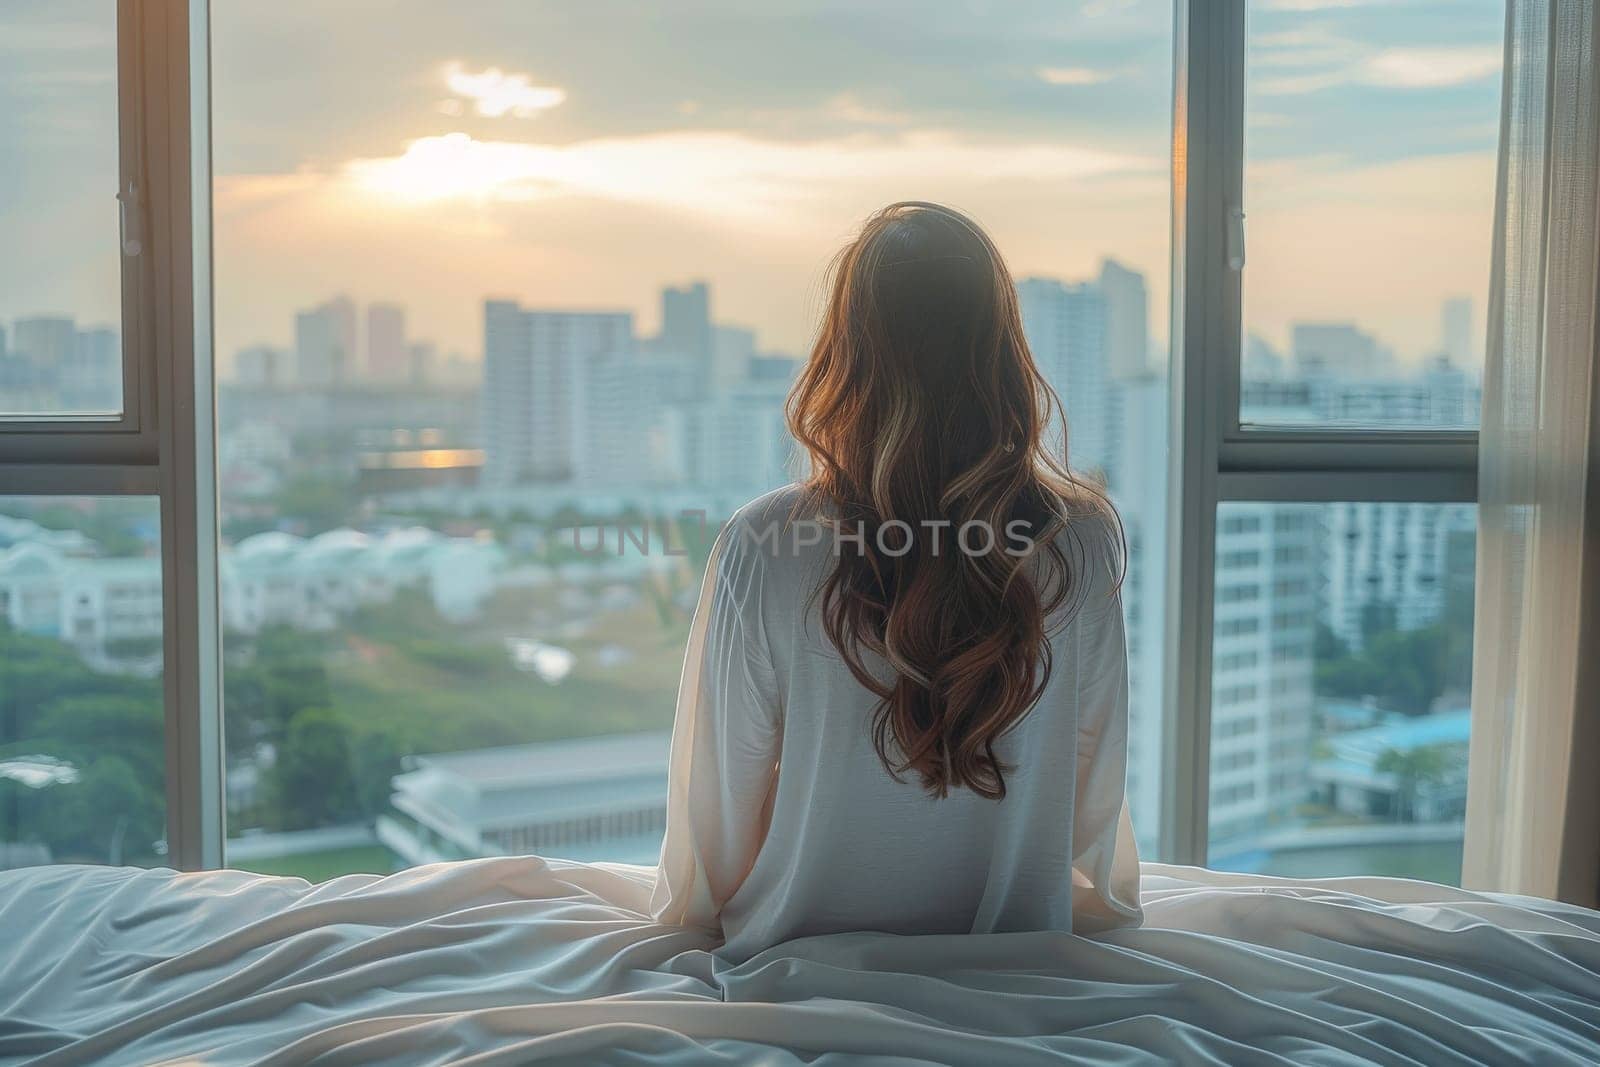 A woman is sitting on a bed with her back to the camera. She is wearing a white robe and she is relaxed. The room has large windows that let in natural light